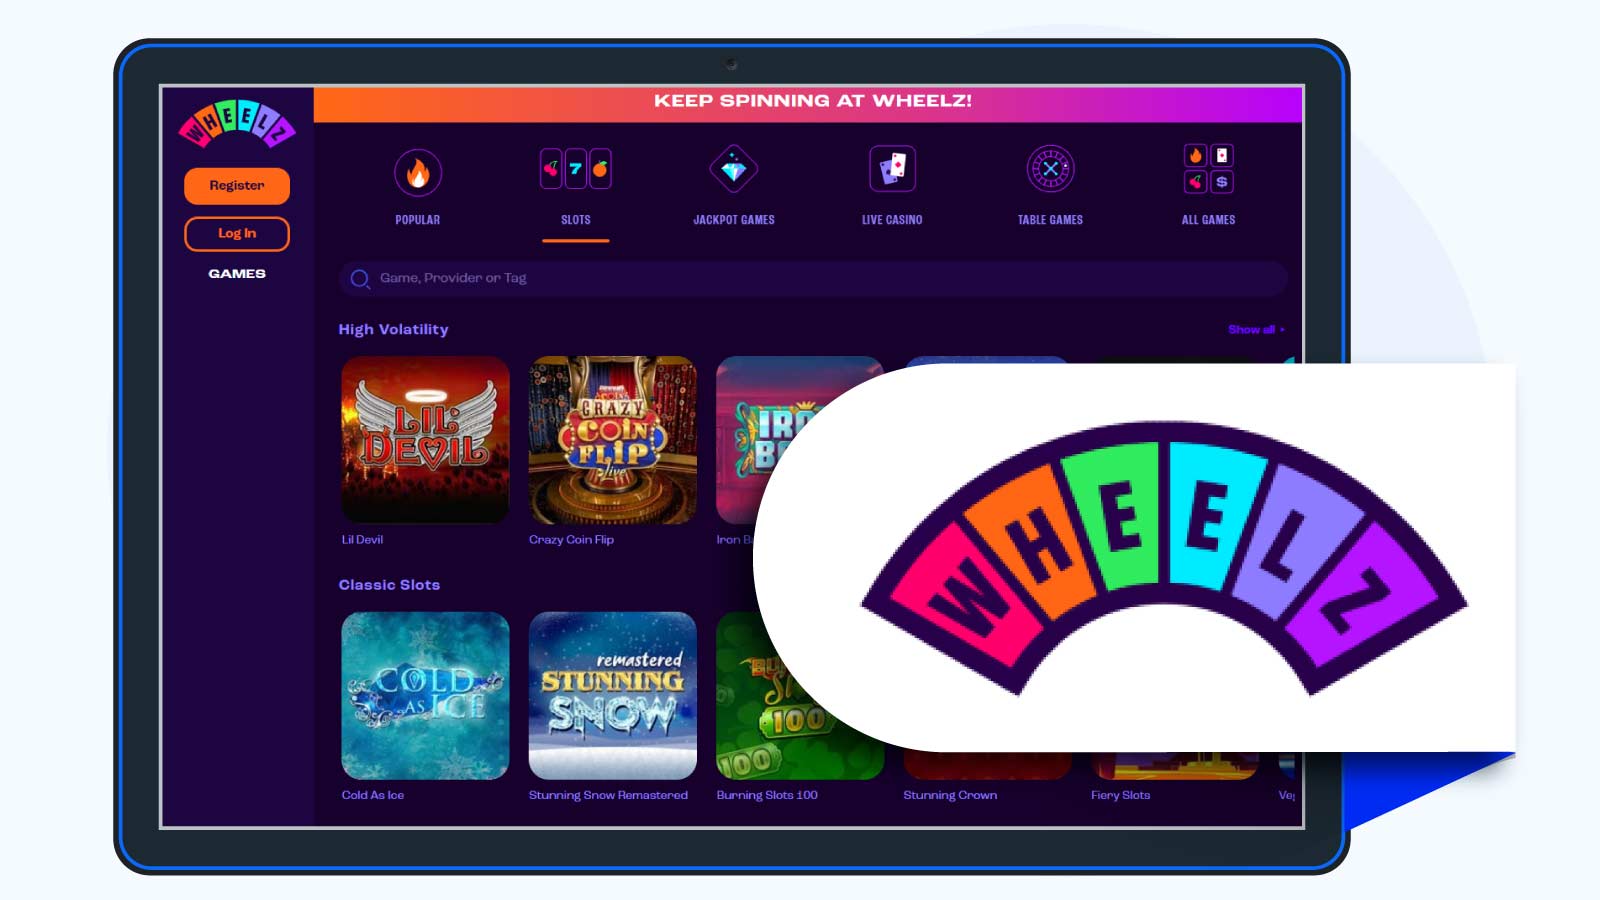 Easiest Wagering for a No Deposit Bonus $2 as 20 Slot Spins at Wheelz Casino